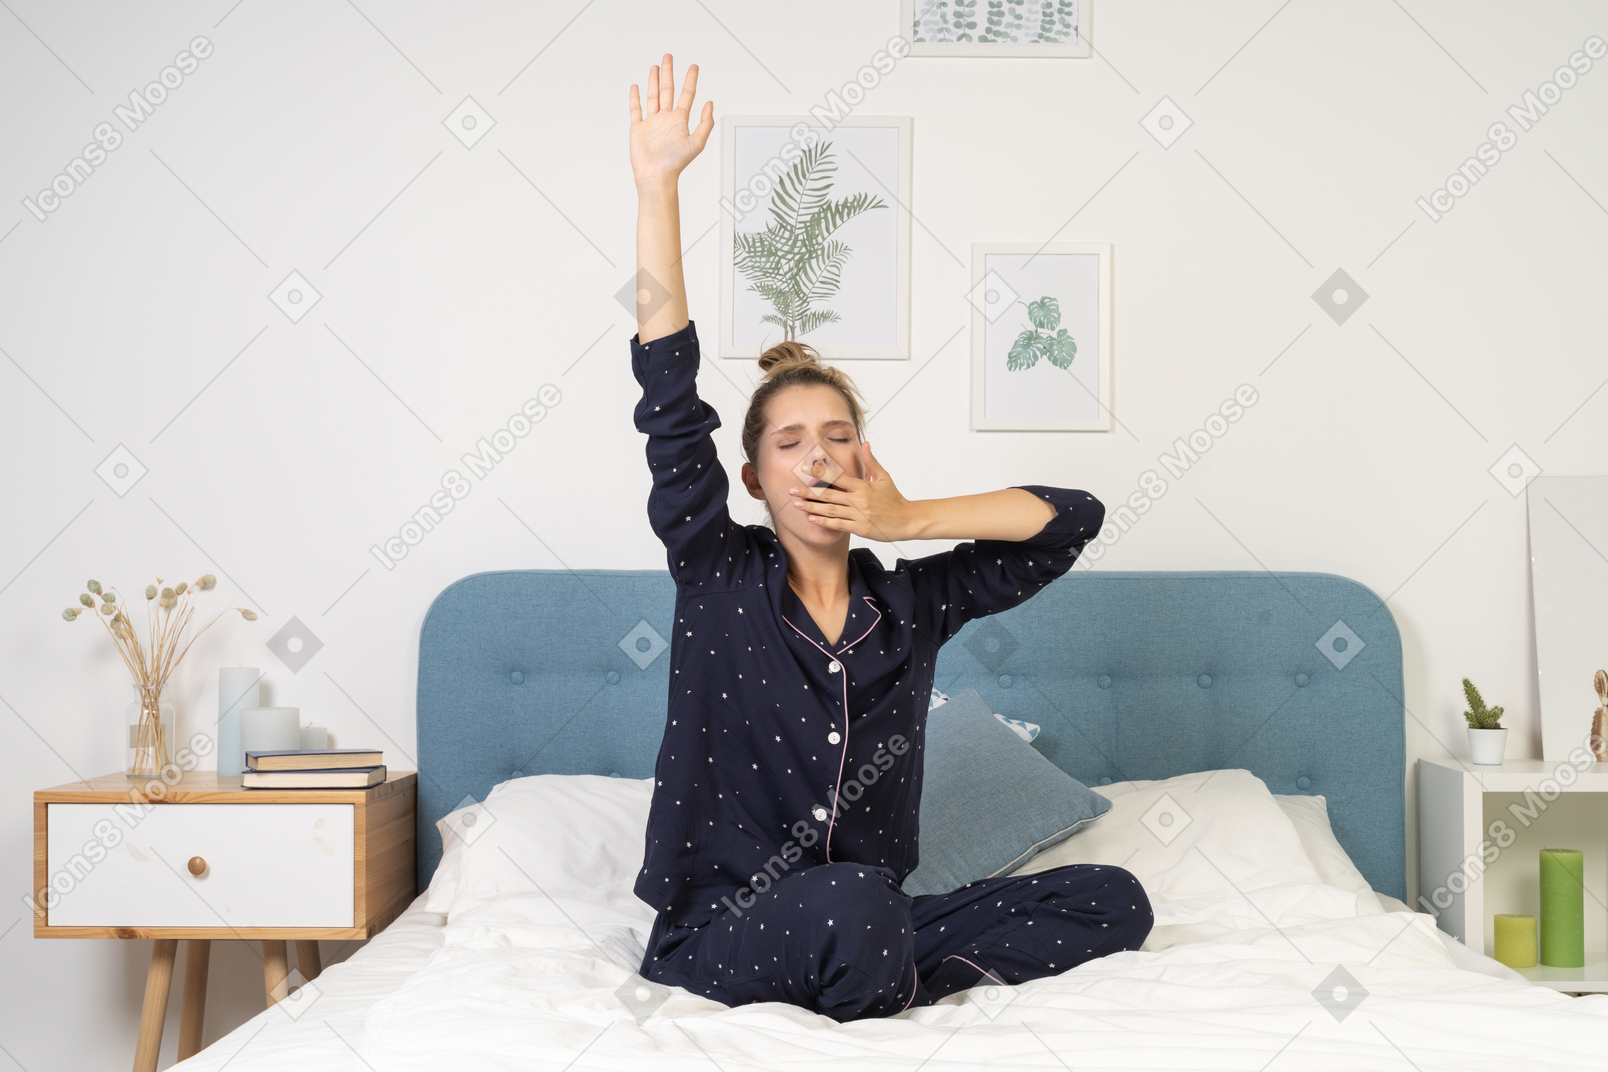 Front view of a young lady in pajamas yawning & staying in bed